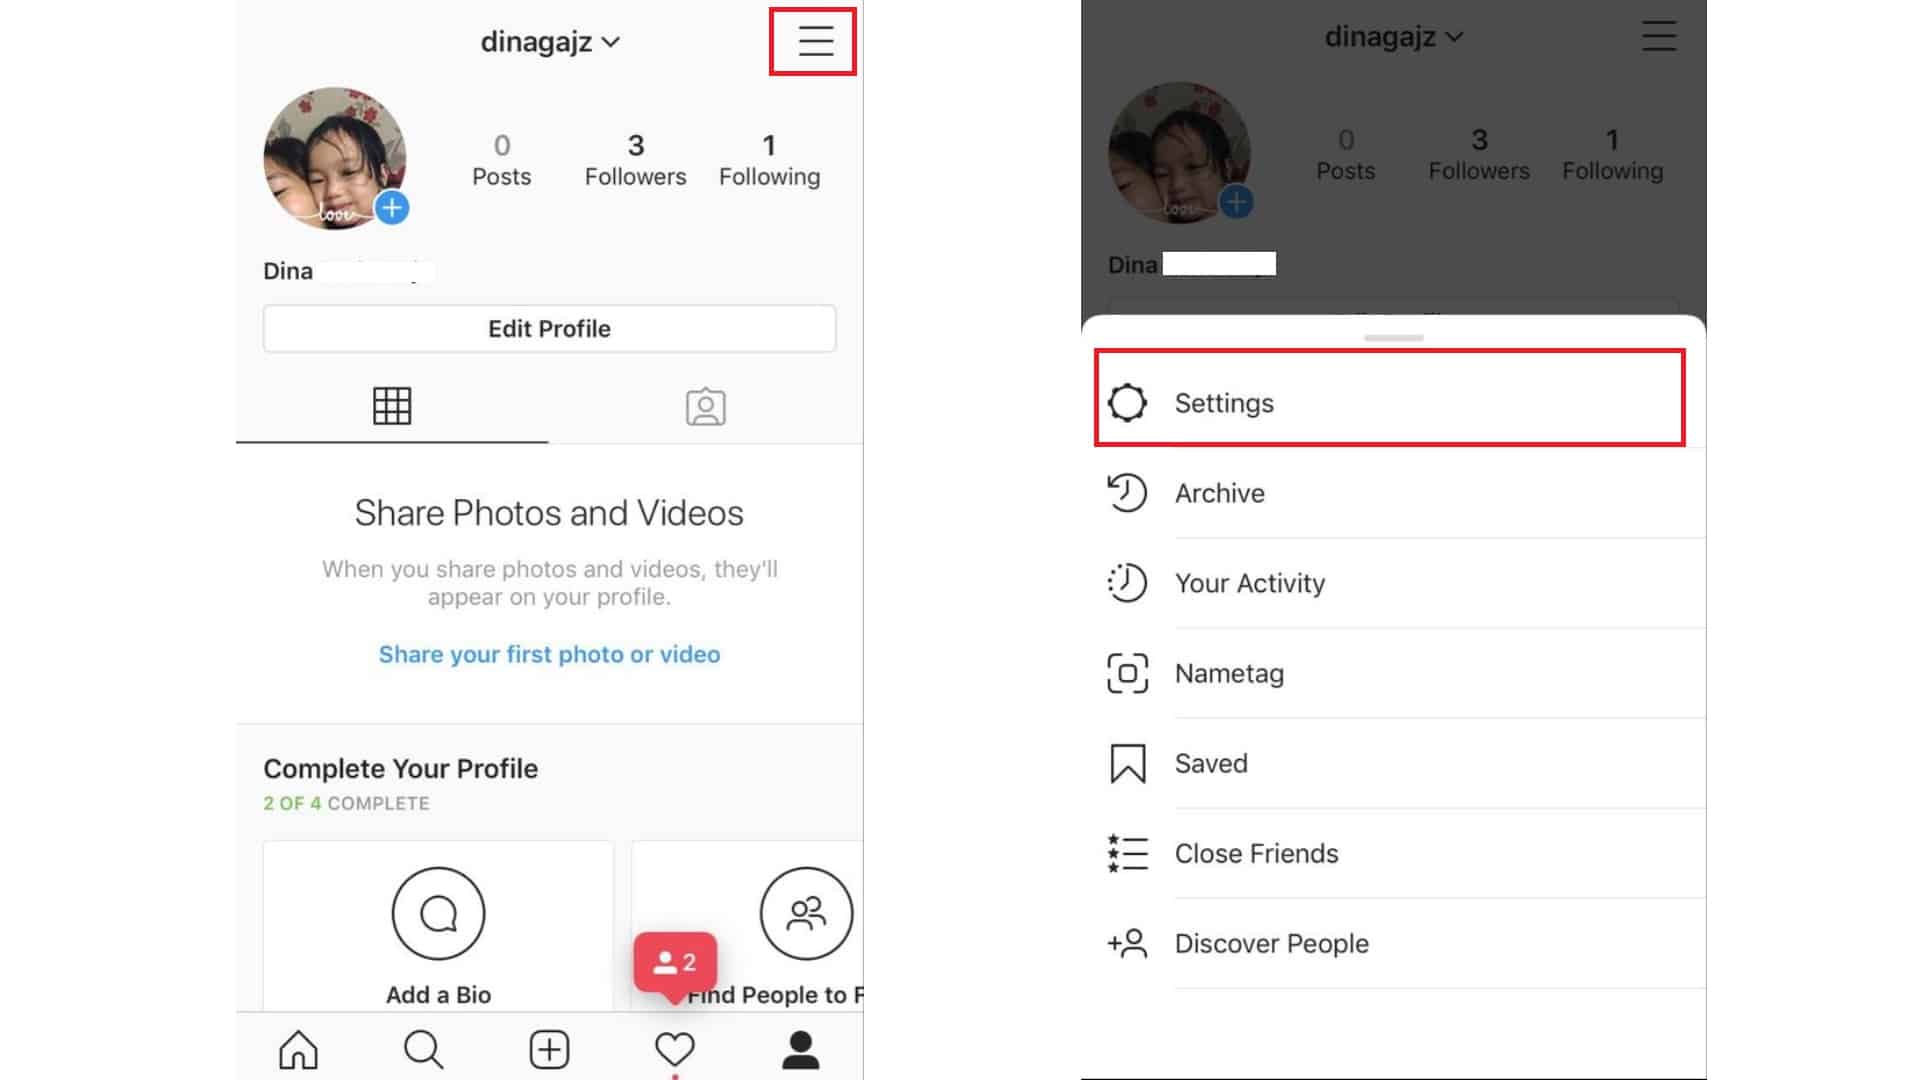 How-to-Request-Verified-Badge-for-Instagram-Profile-on-iPhone-2020-guide